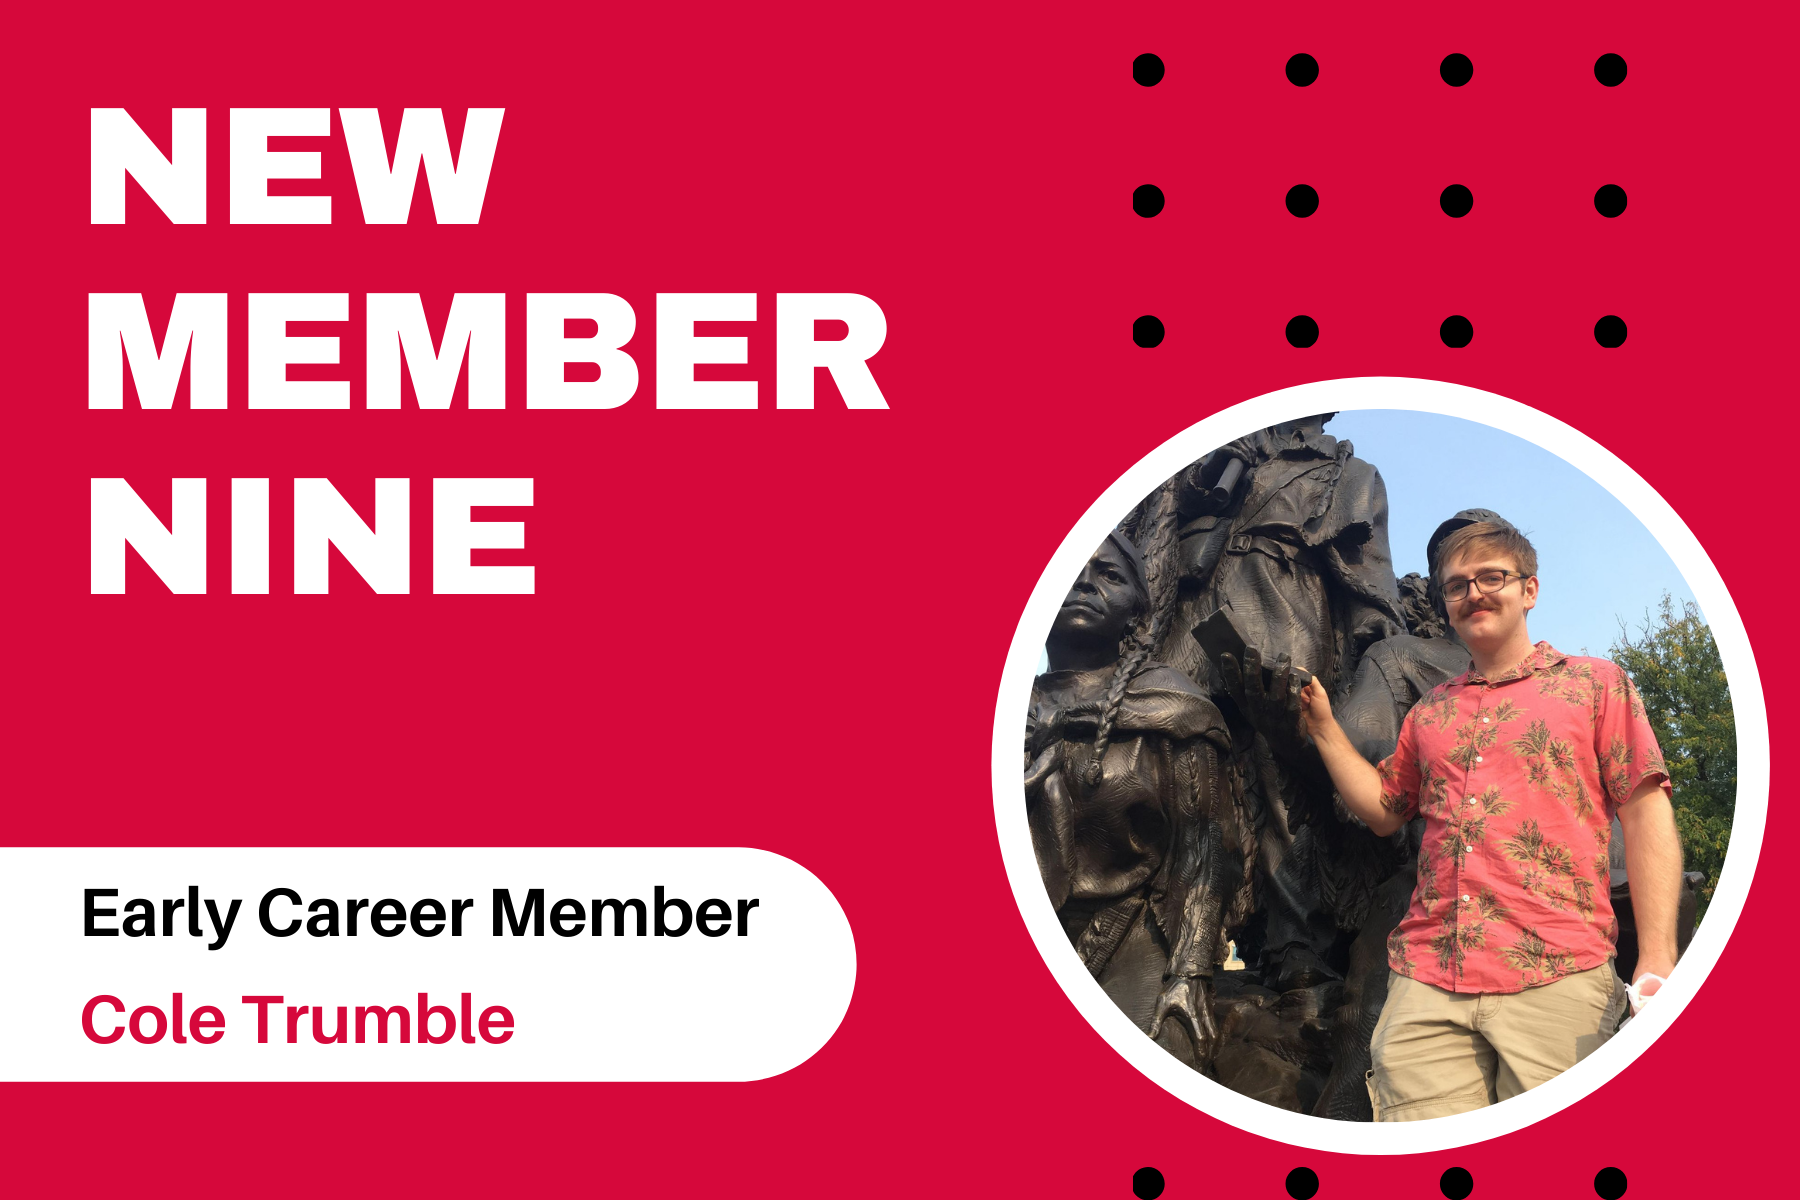 New Member Nine Cole Trumble Graphic